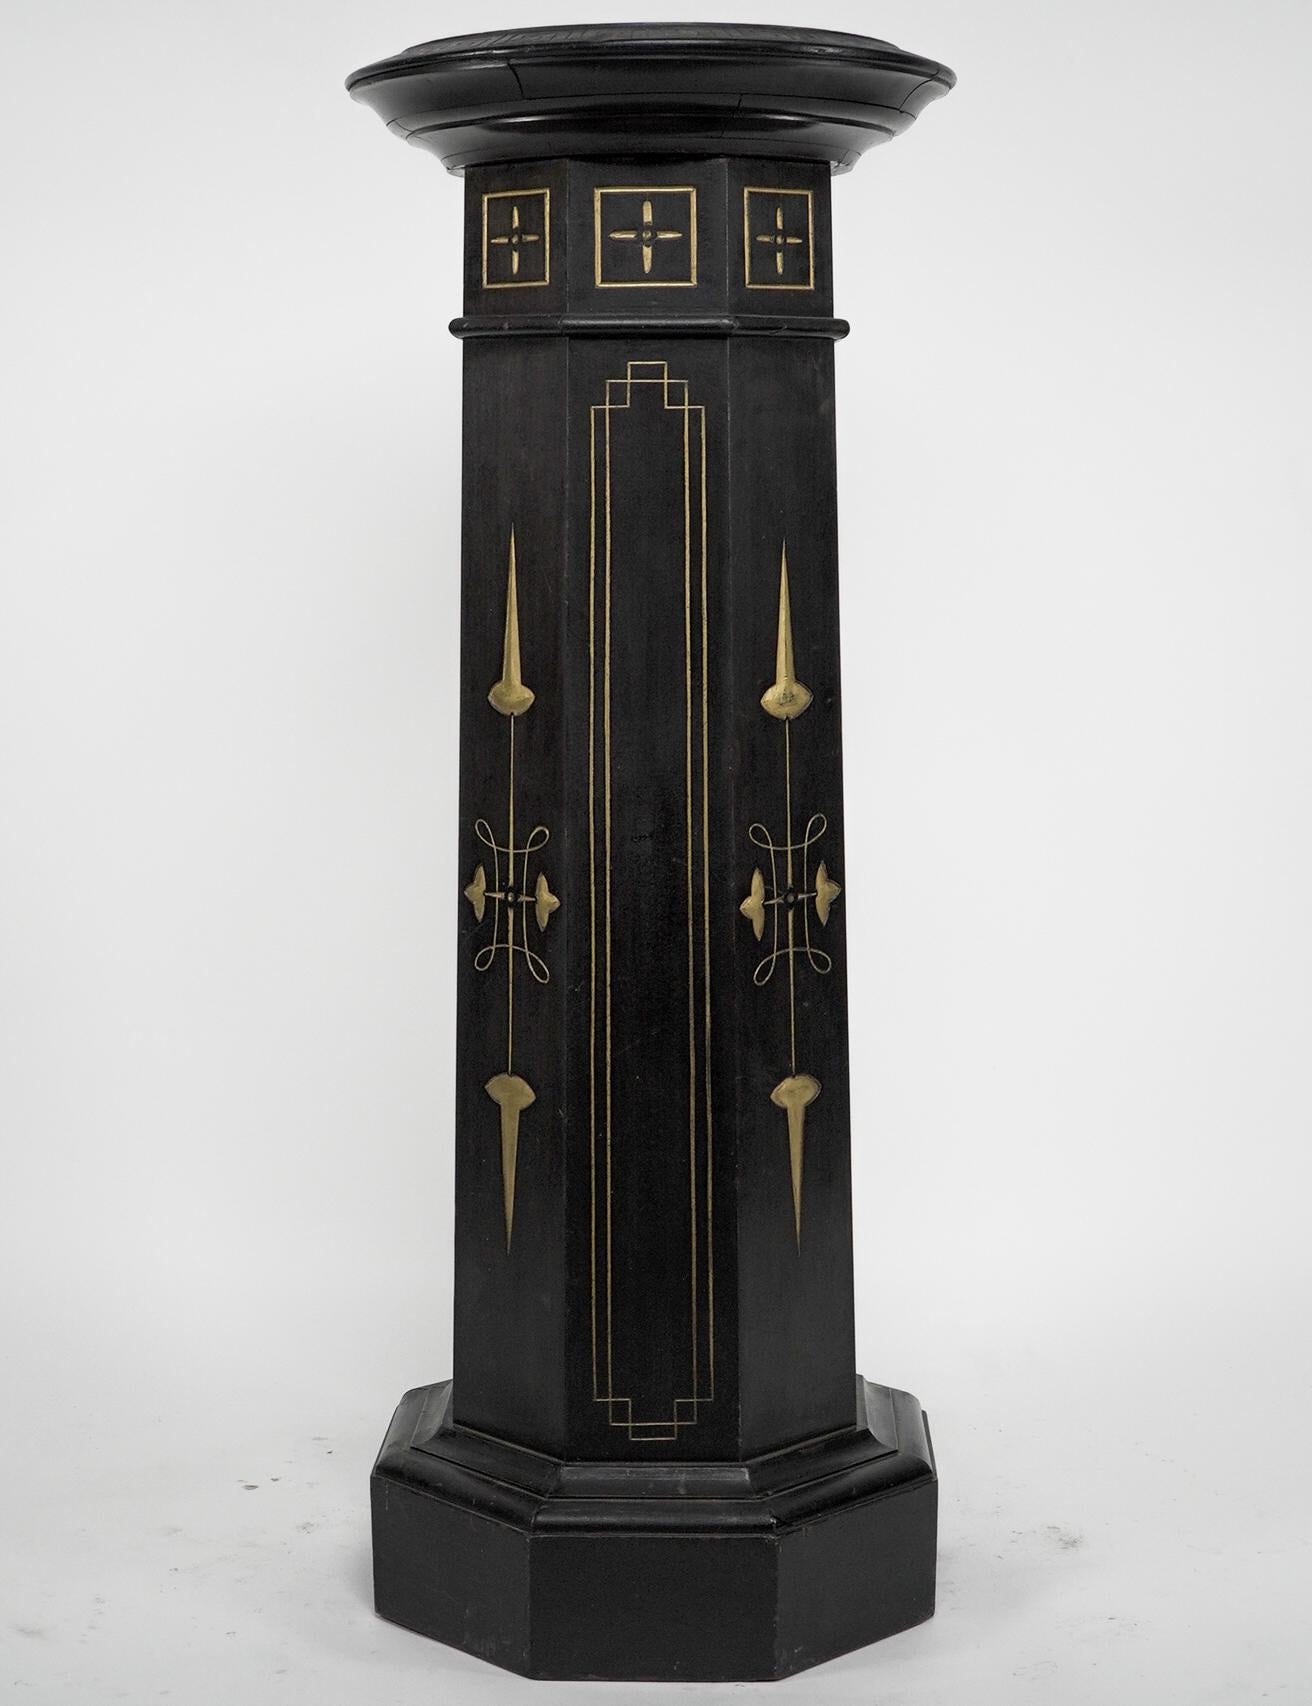 An Aesthetic Movement ebonized and gilded pedestal torchère in the style of Dr C Dresser. The circular top has a Greek key pattern band, the main octagonal column has incised and gilded decoration, on a plinth base. Dimensions - 38